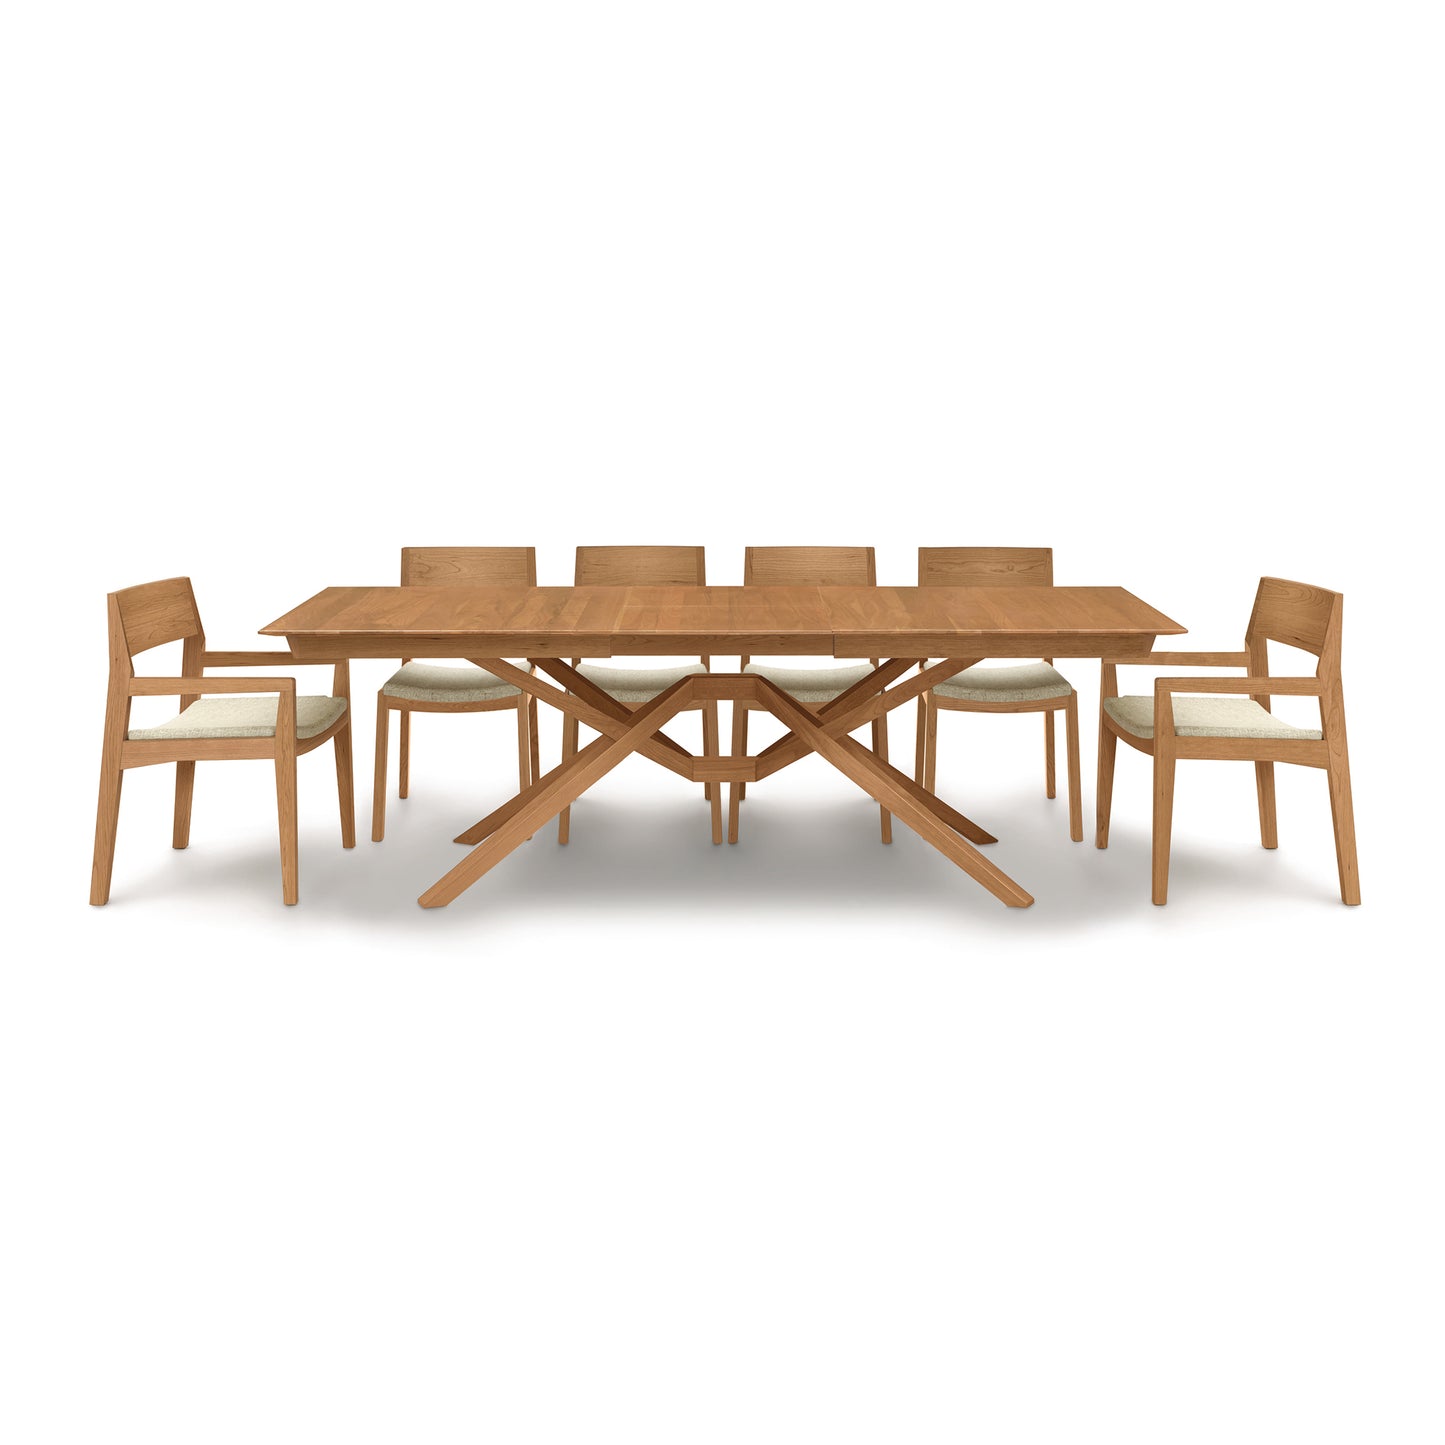 A Copeland Furniture Exeter Extension Dining Table set with six chairs and a butterfly leaf extension on a white background.